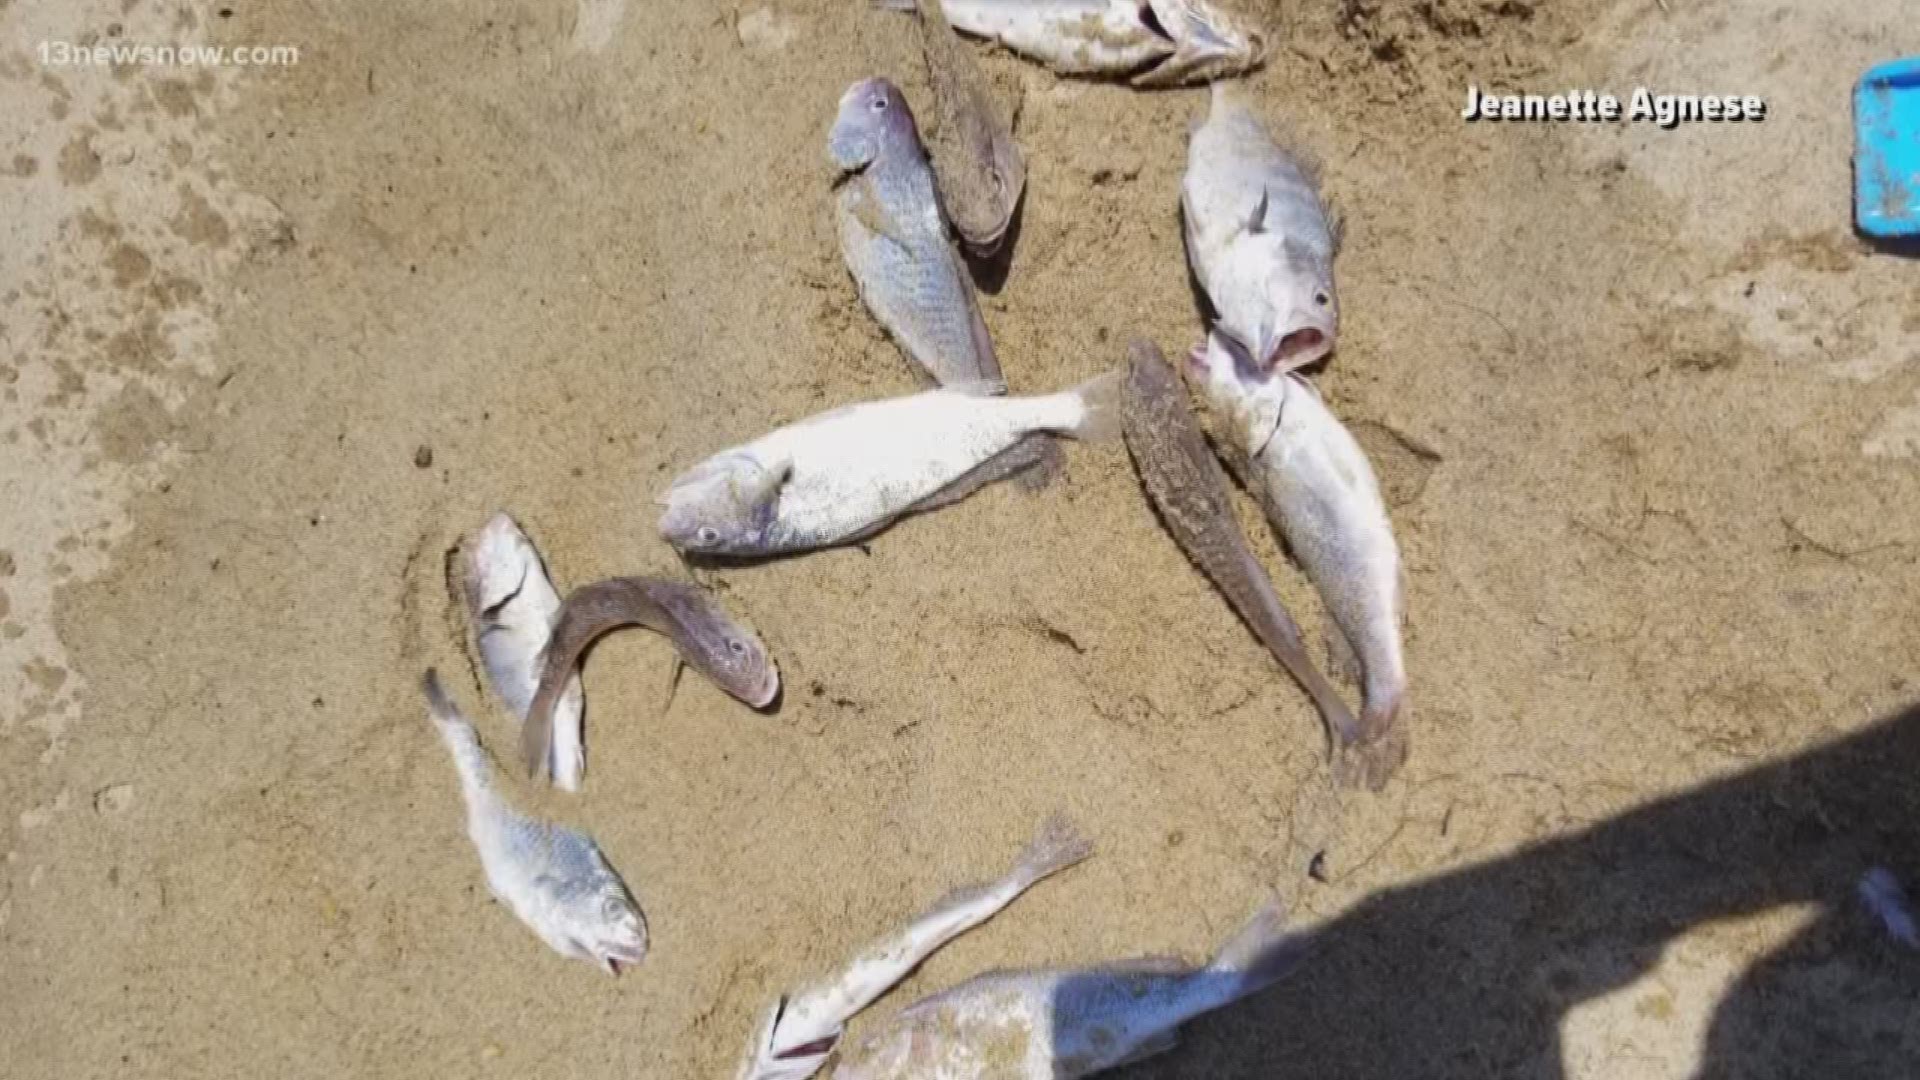 Janette Agnese said she saw 13 dead fish wash ashore. While it may be gross, officials said it's not uncommon.